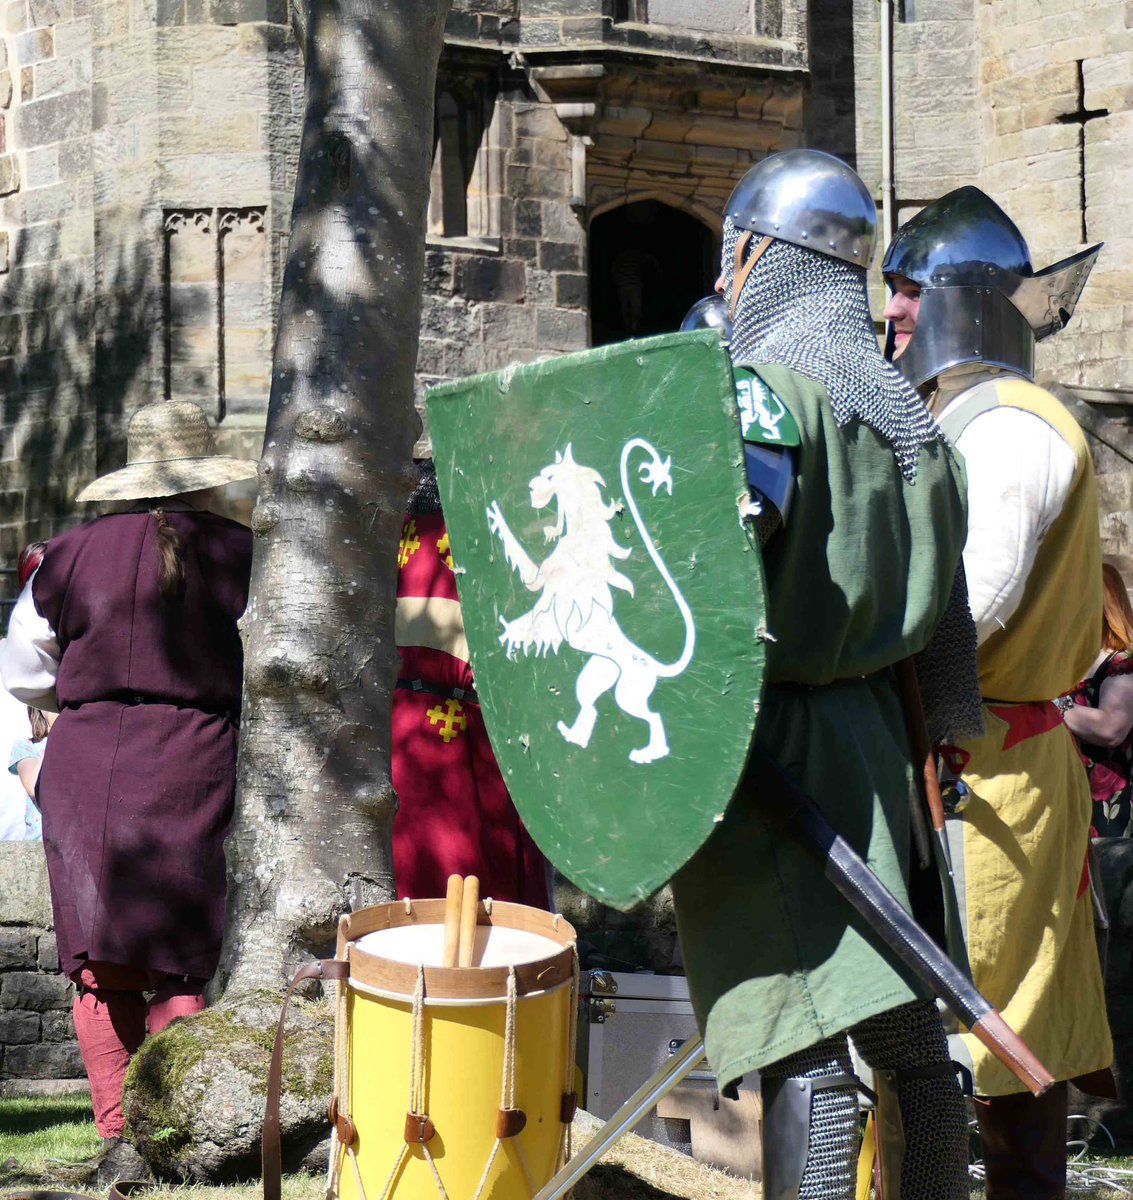 Journey back to the 14 Century with a re-enactment of Castle life with Tournee on Saturday 17th & 18th June. 10am - 5pm